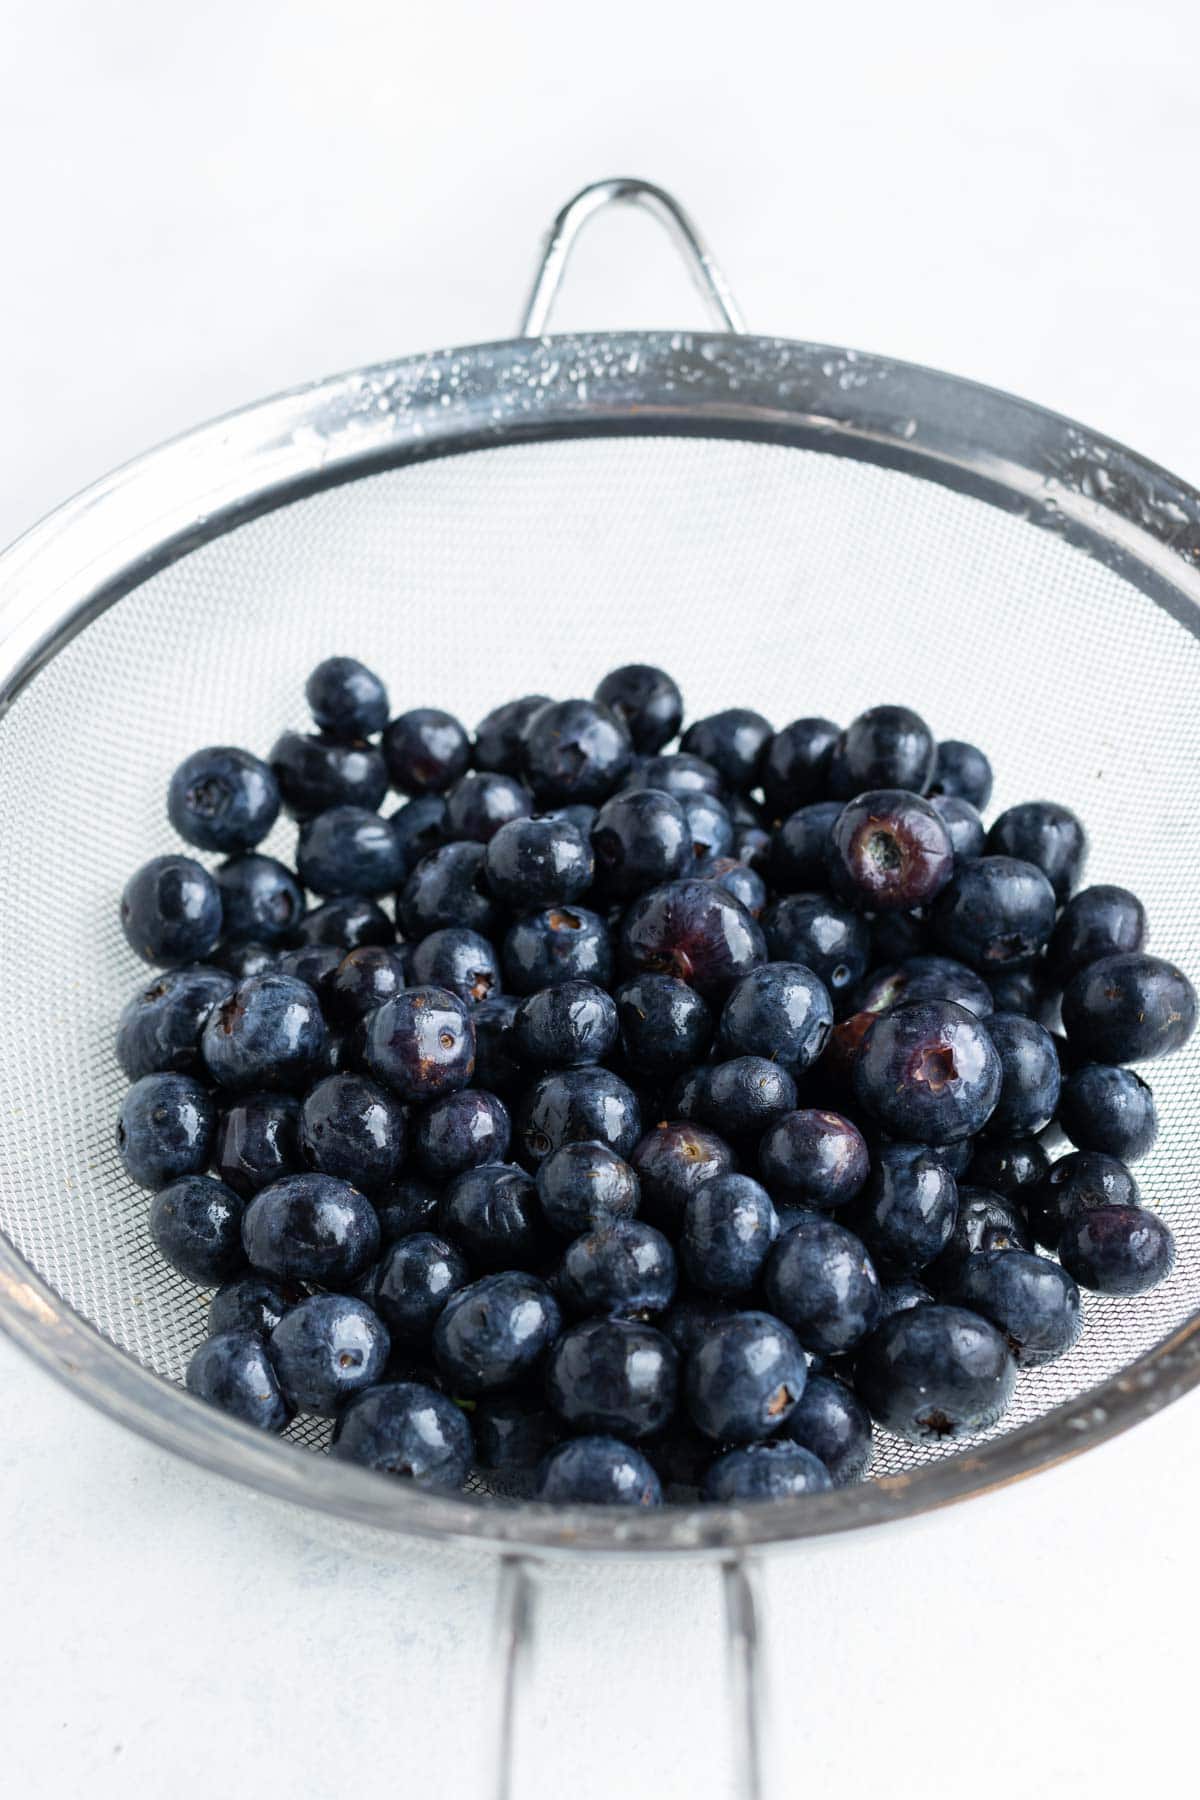 Fresh blueberries are prepared and washed before laying flat.